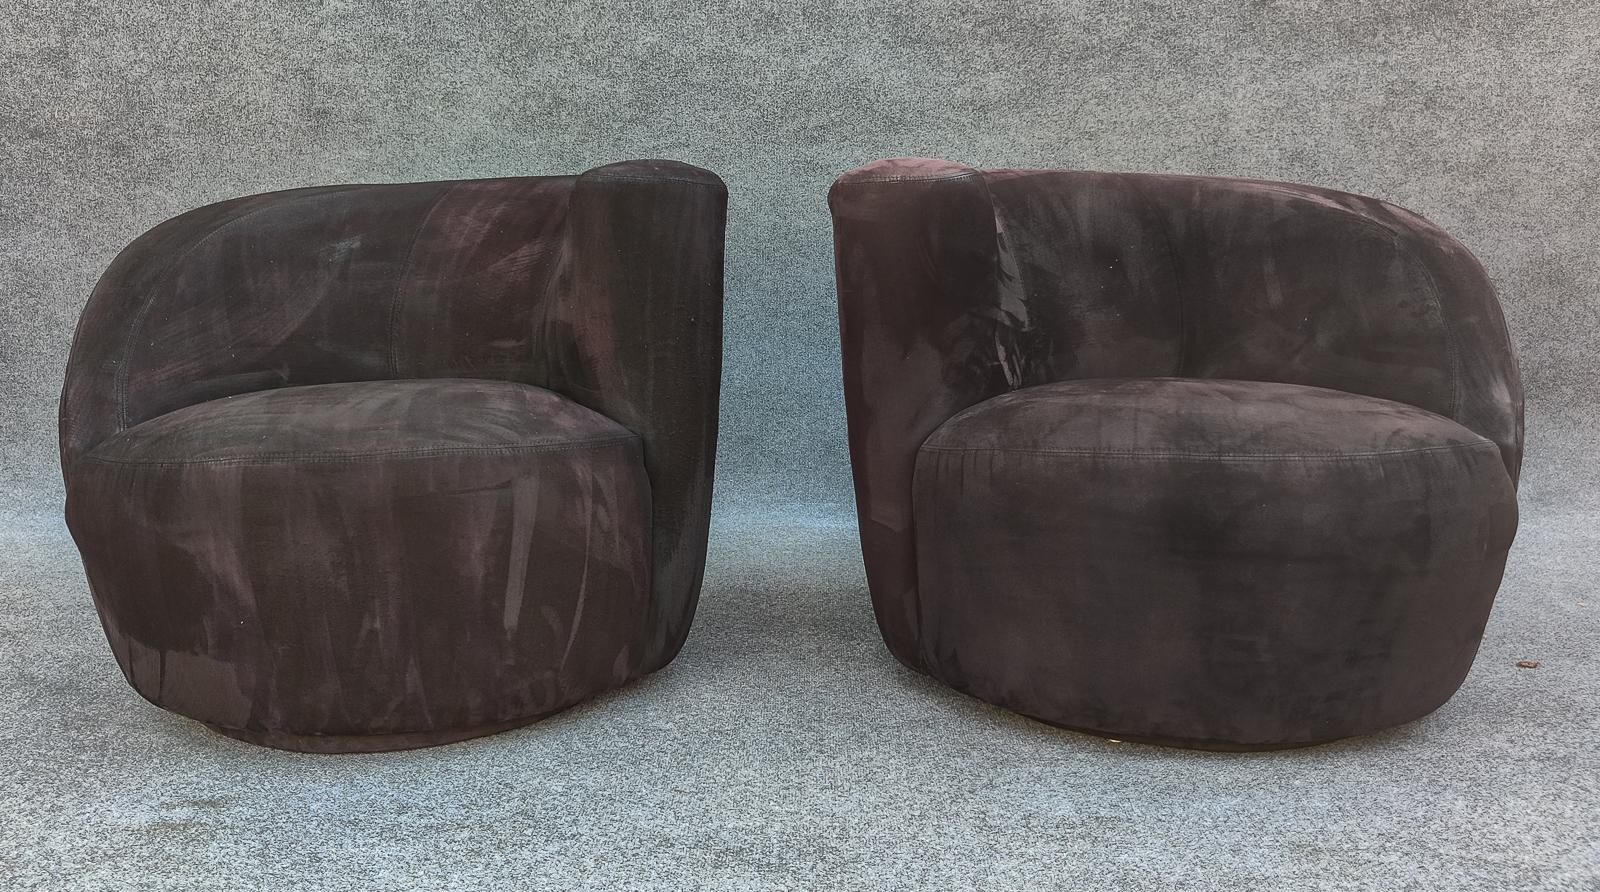 Reminiscent of the Nautilus chair, designed by Vladimir Kagan in 1950, here is a sculptural pair (left and right) of iconic mid-century modern swivel lounge chairs. Its distinct and organic design features a curved, shell-like shape made of suede